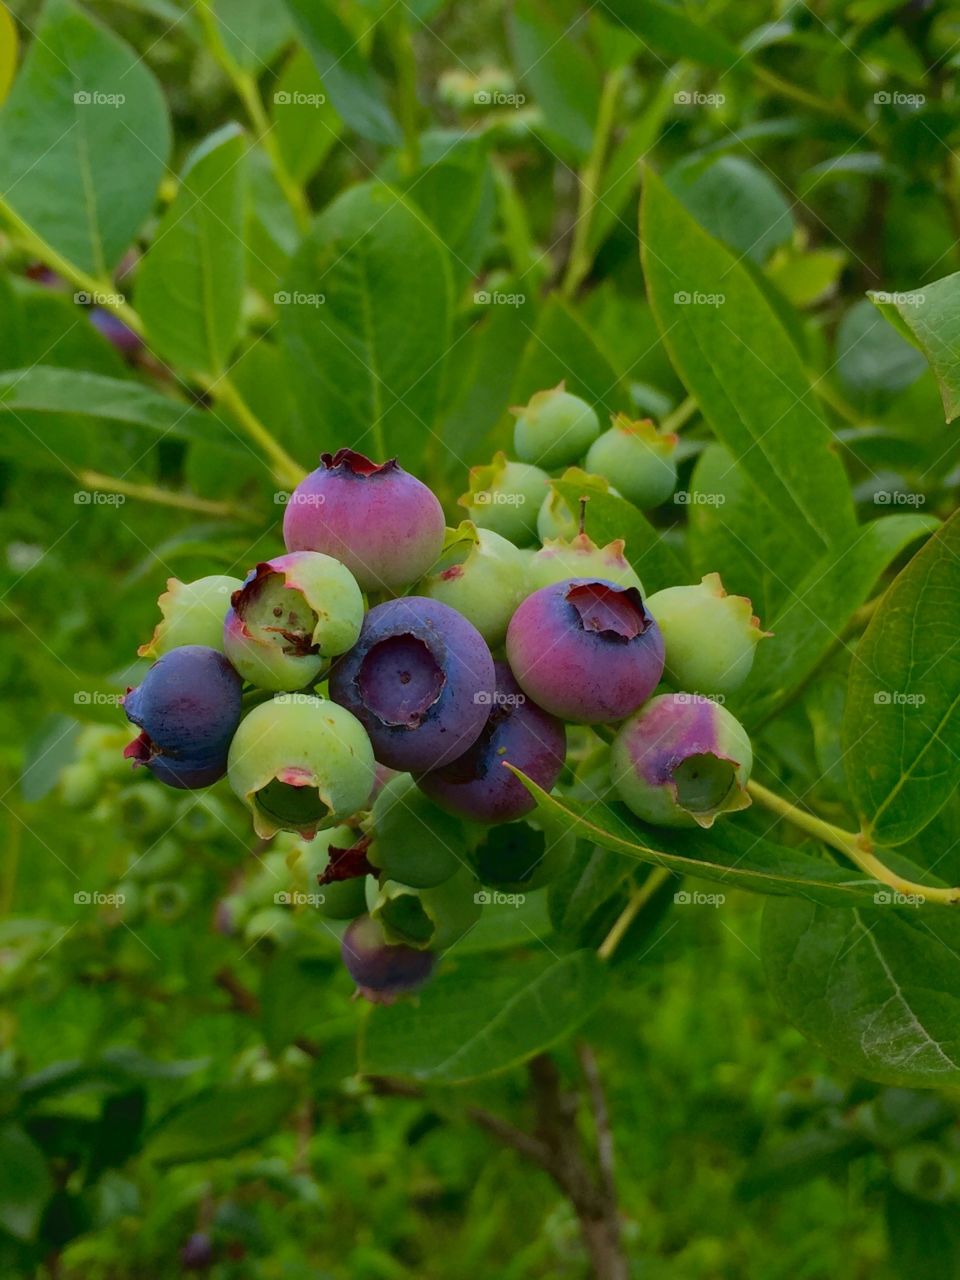 Shades of Blues. A cluster of blueberries in various stages of ripening.